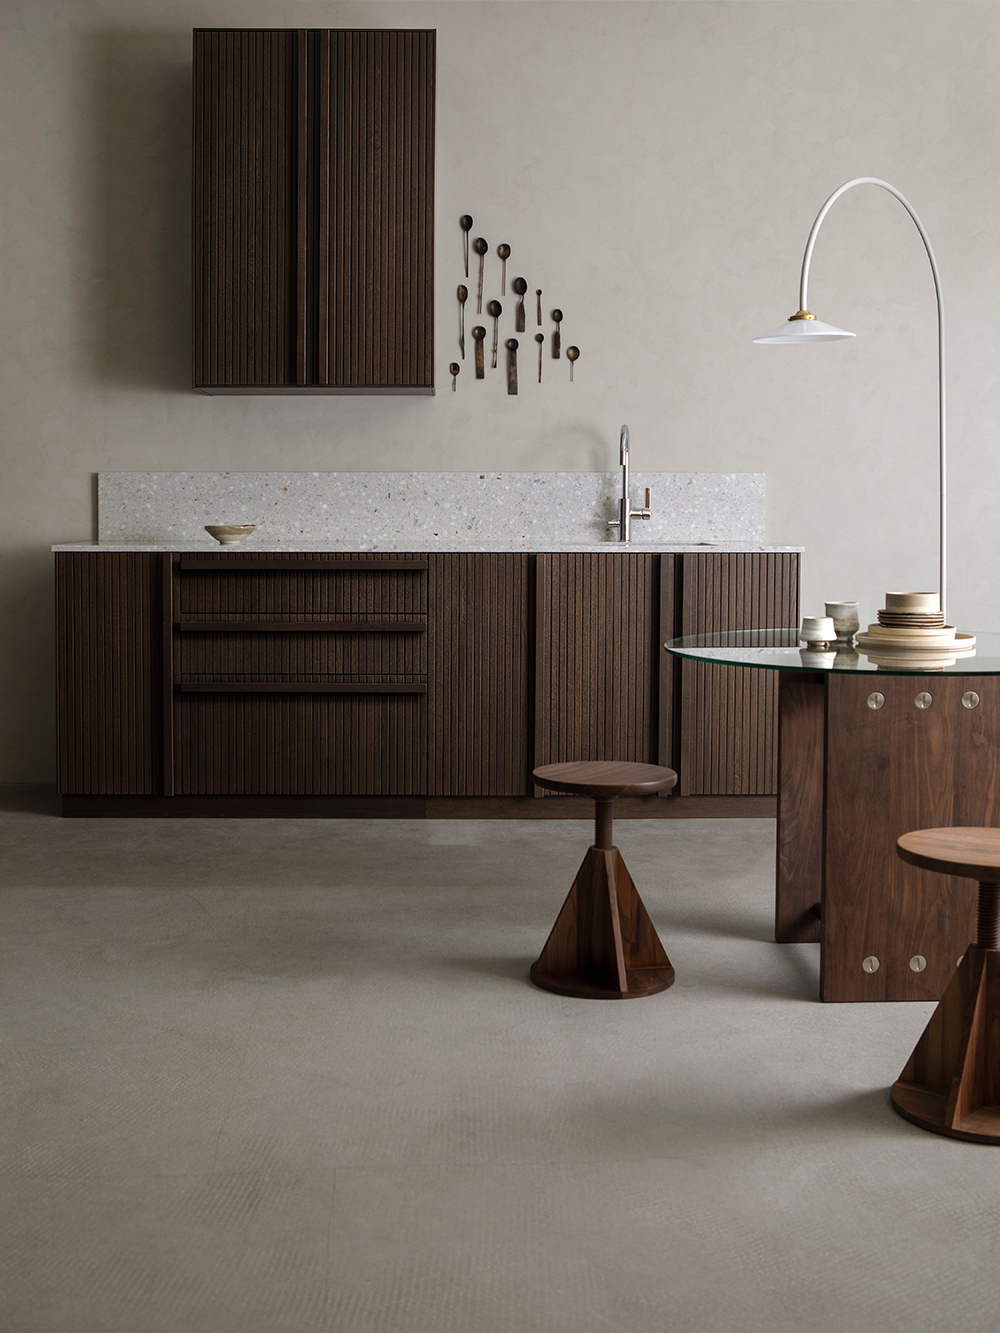 Superfront Launches Elegant Wood Kitchen Collection